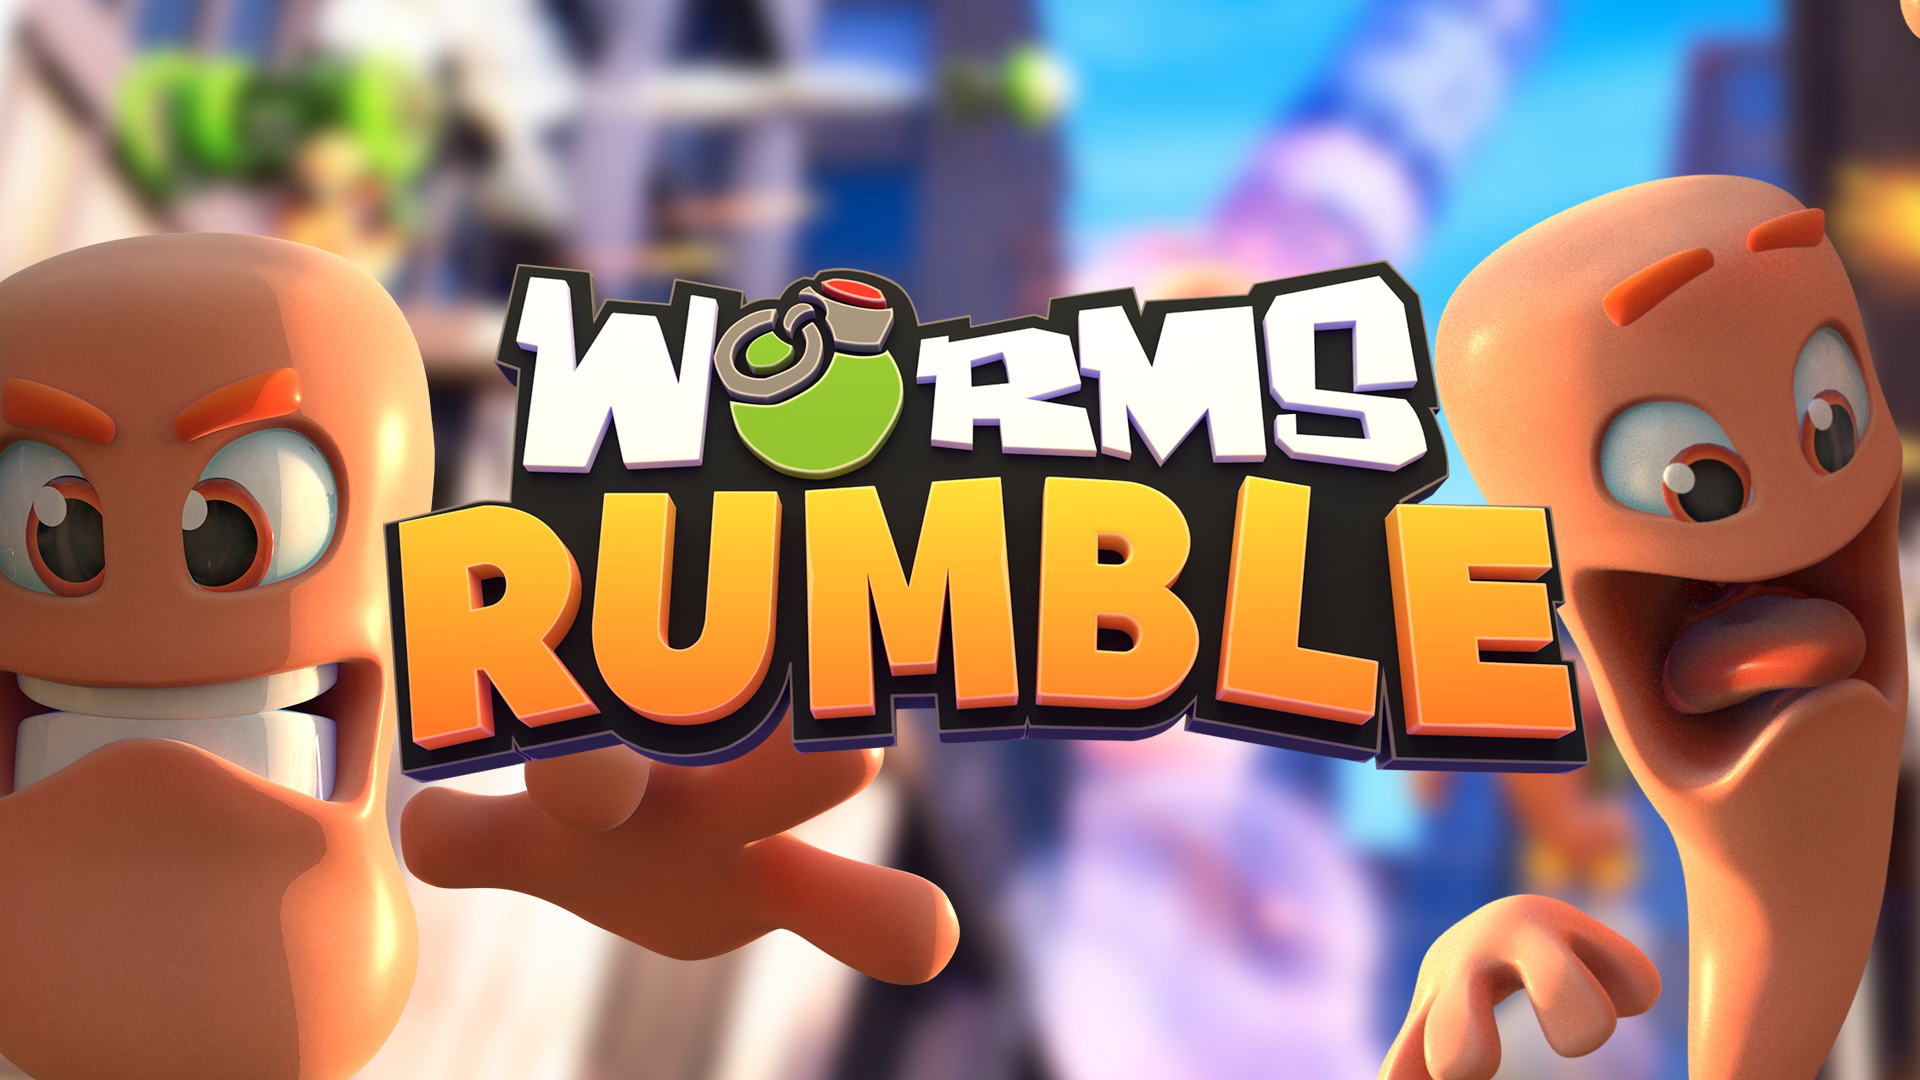 Of The Team17 Games - Now! Available Rumble Spirit - Digital Independent LTD Worms Is